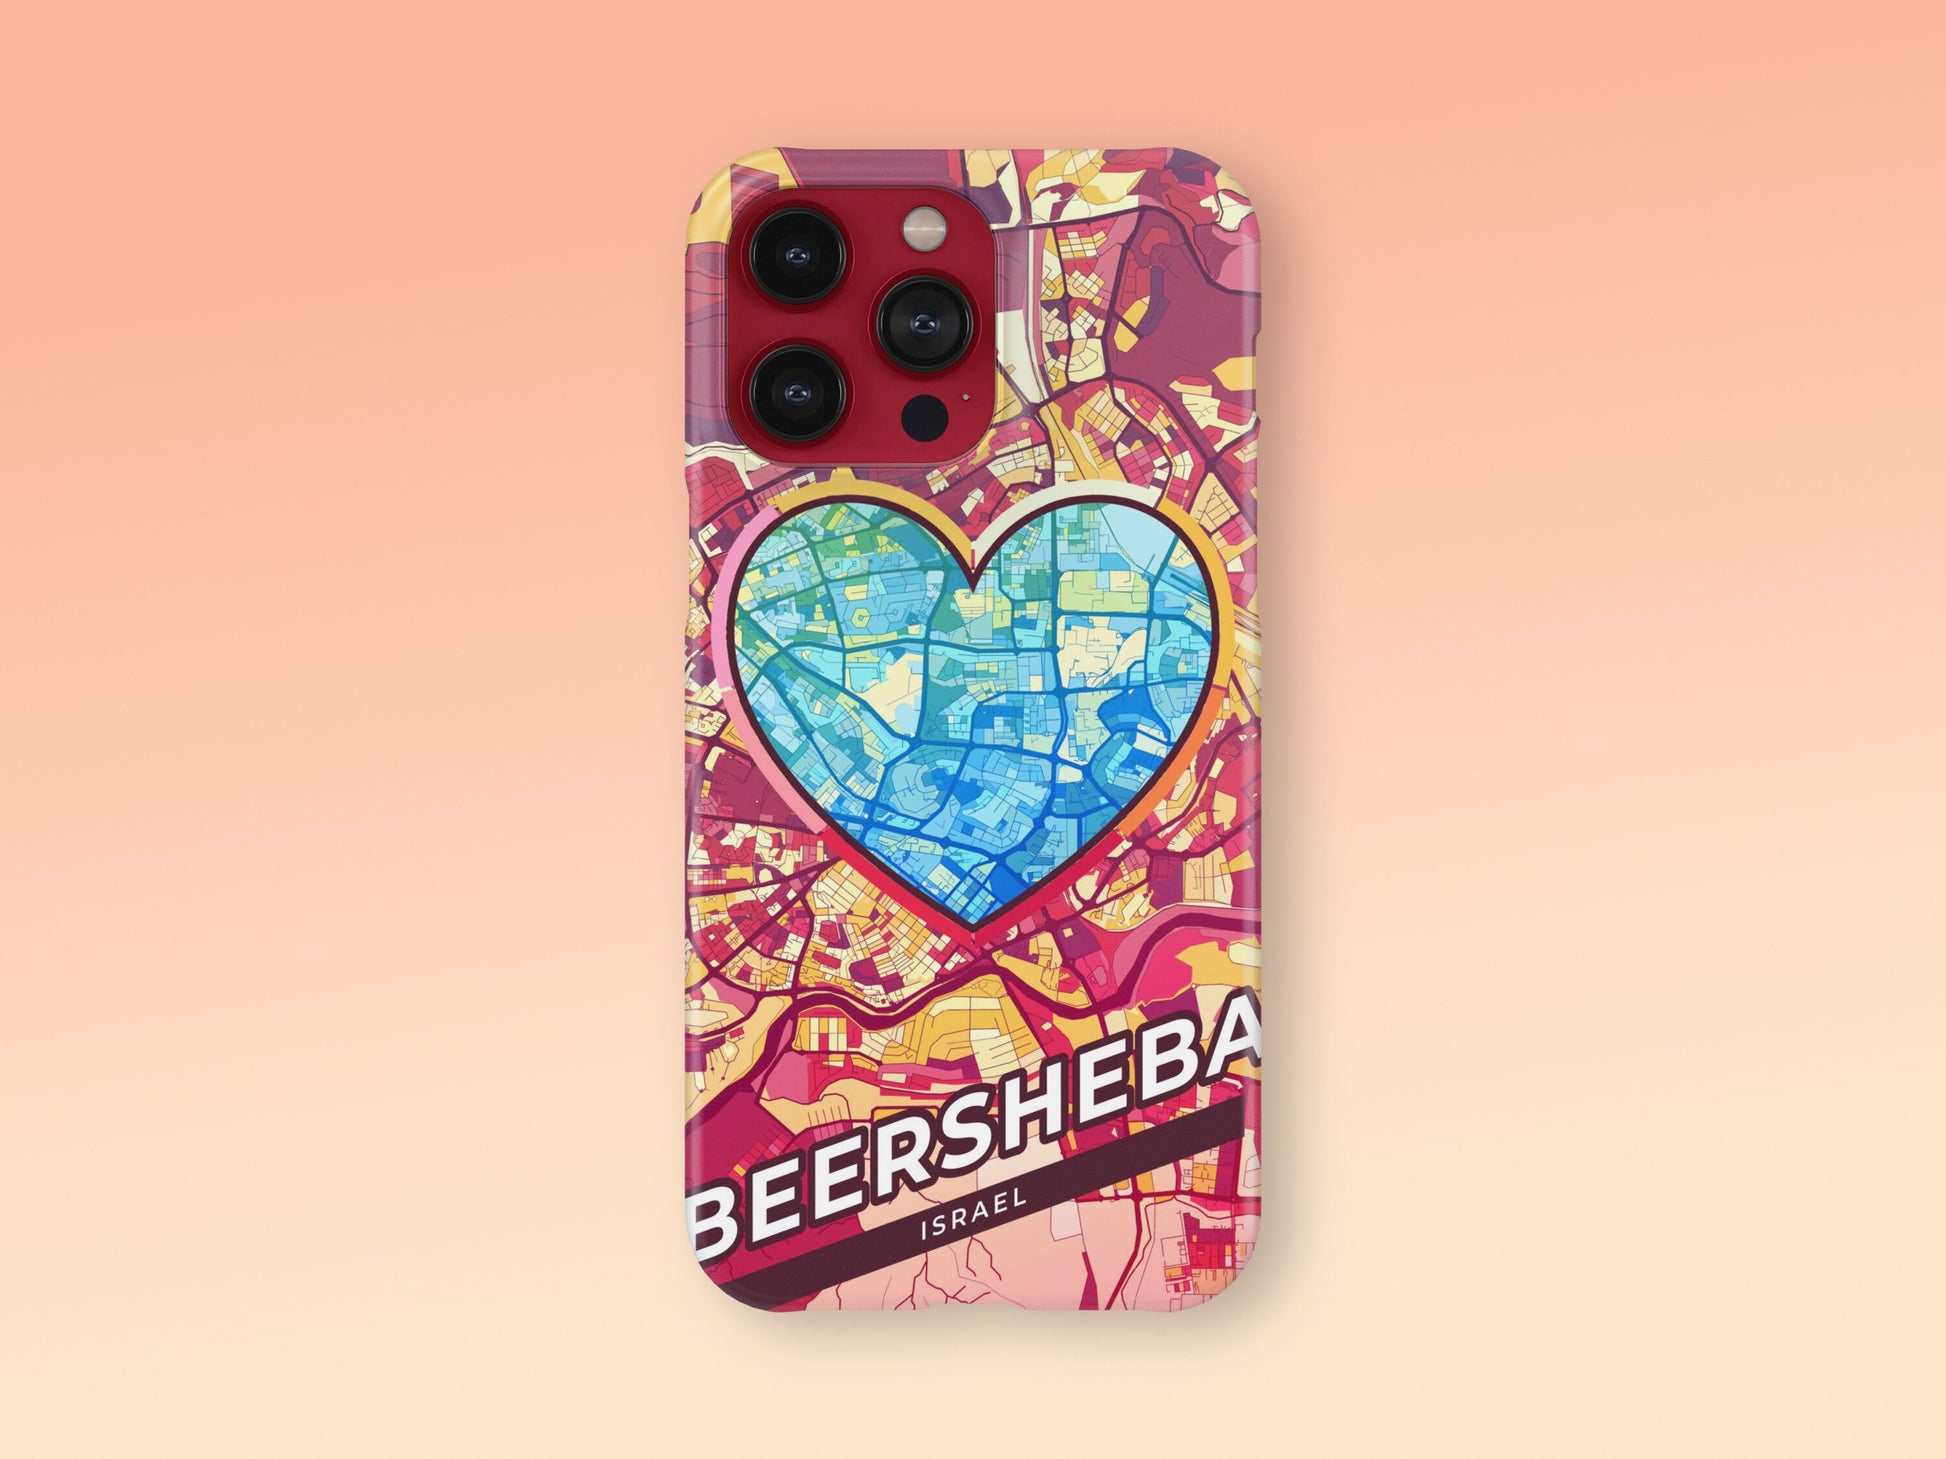 Beersheba Israel slim phone case with colorful icon. Birthday, wedding or housewarming gift. Couple match cases. 2